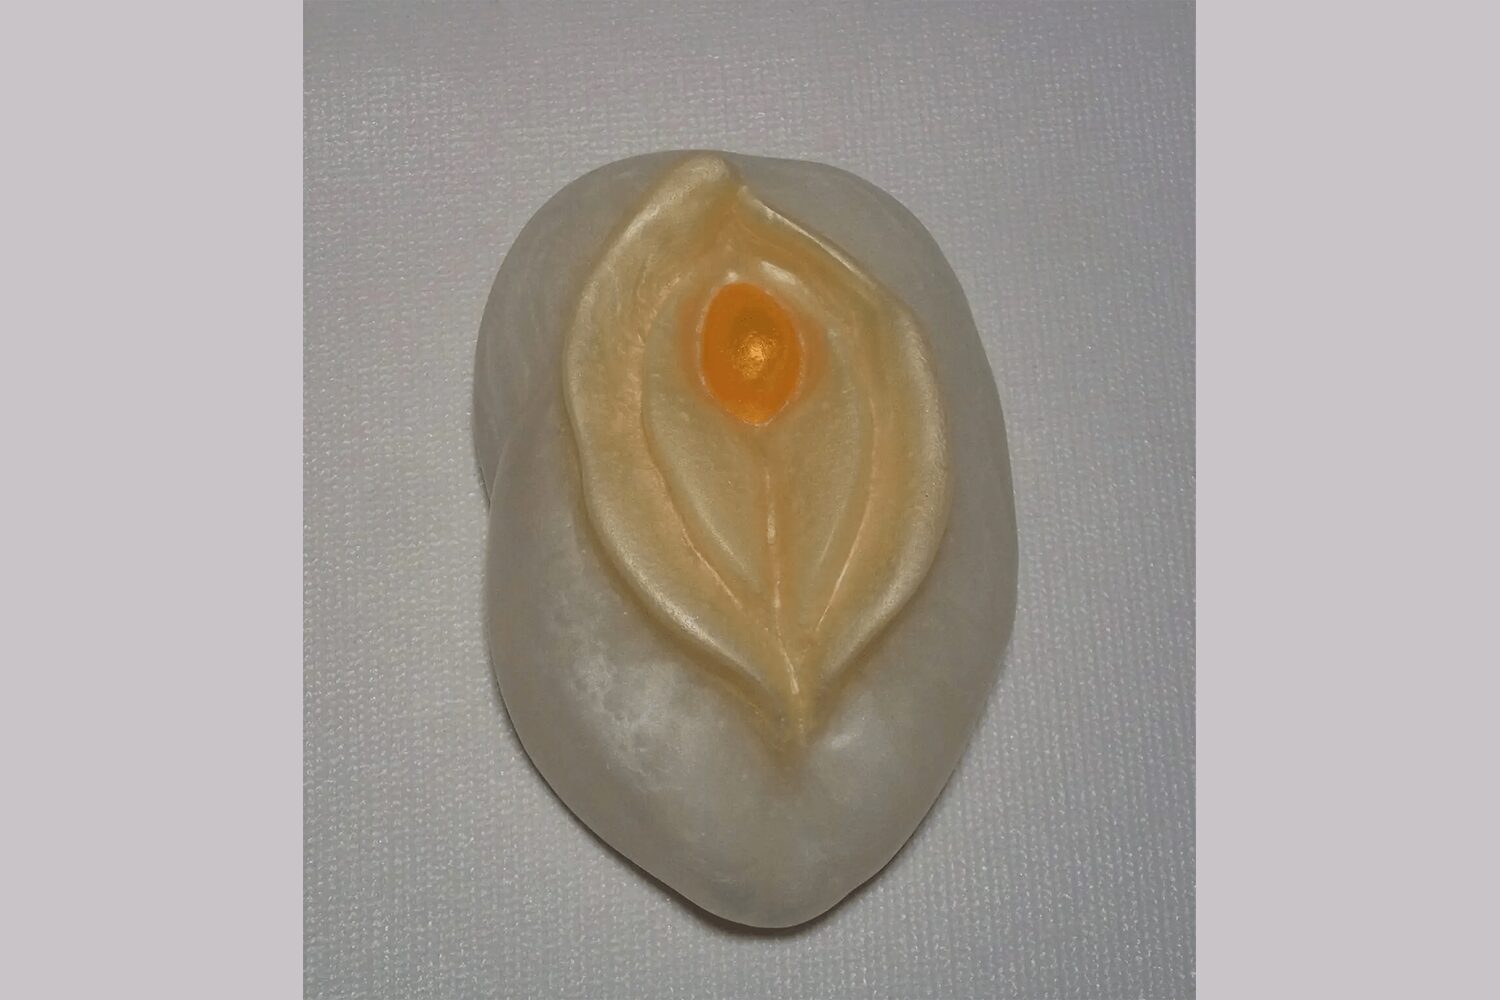 A white object with an orange center on top of it.